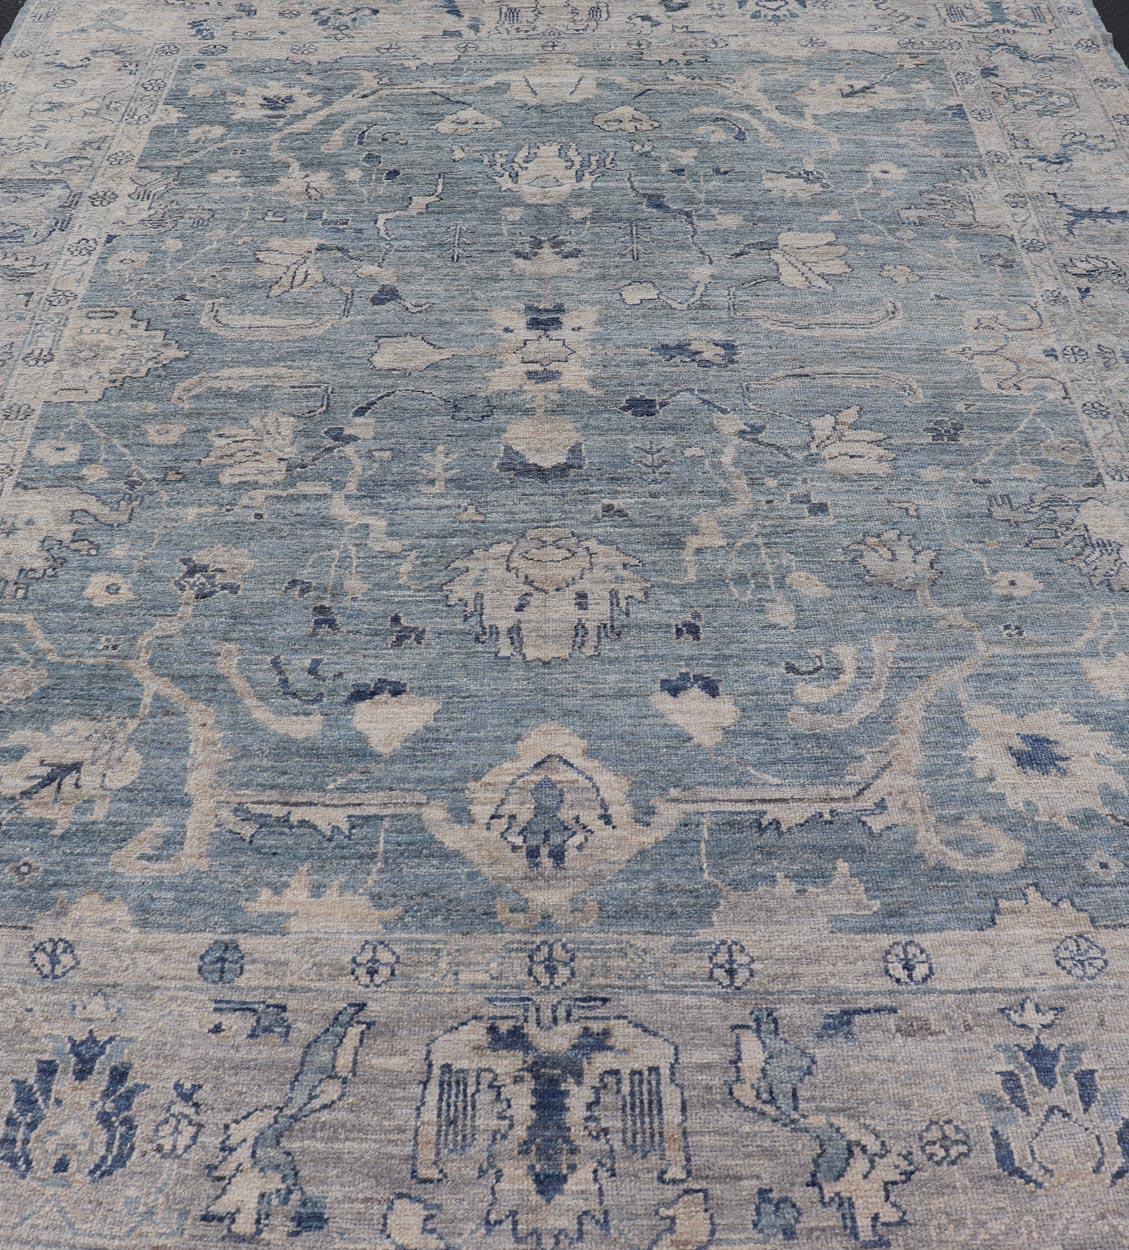 Turkish Angora Oushak Rug in Dusty Blue Background and Silver Border. Keivan Woven Arts / rug AN-151115, country of origin / type: Turkey / Oushak. Antique reproduction Ushak, angora Oushak.
Measures: 9'2 x 11'7
The angora collection is made with